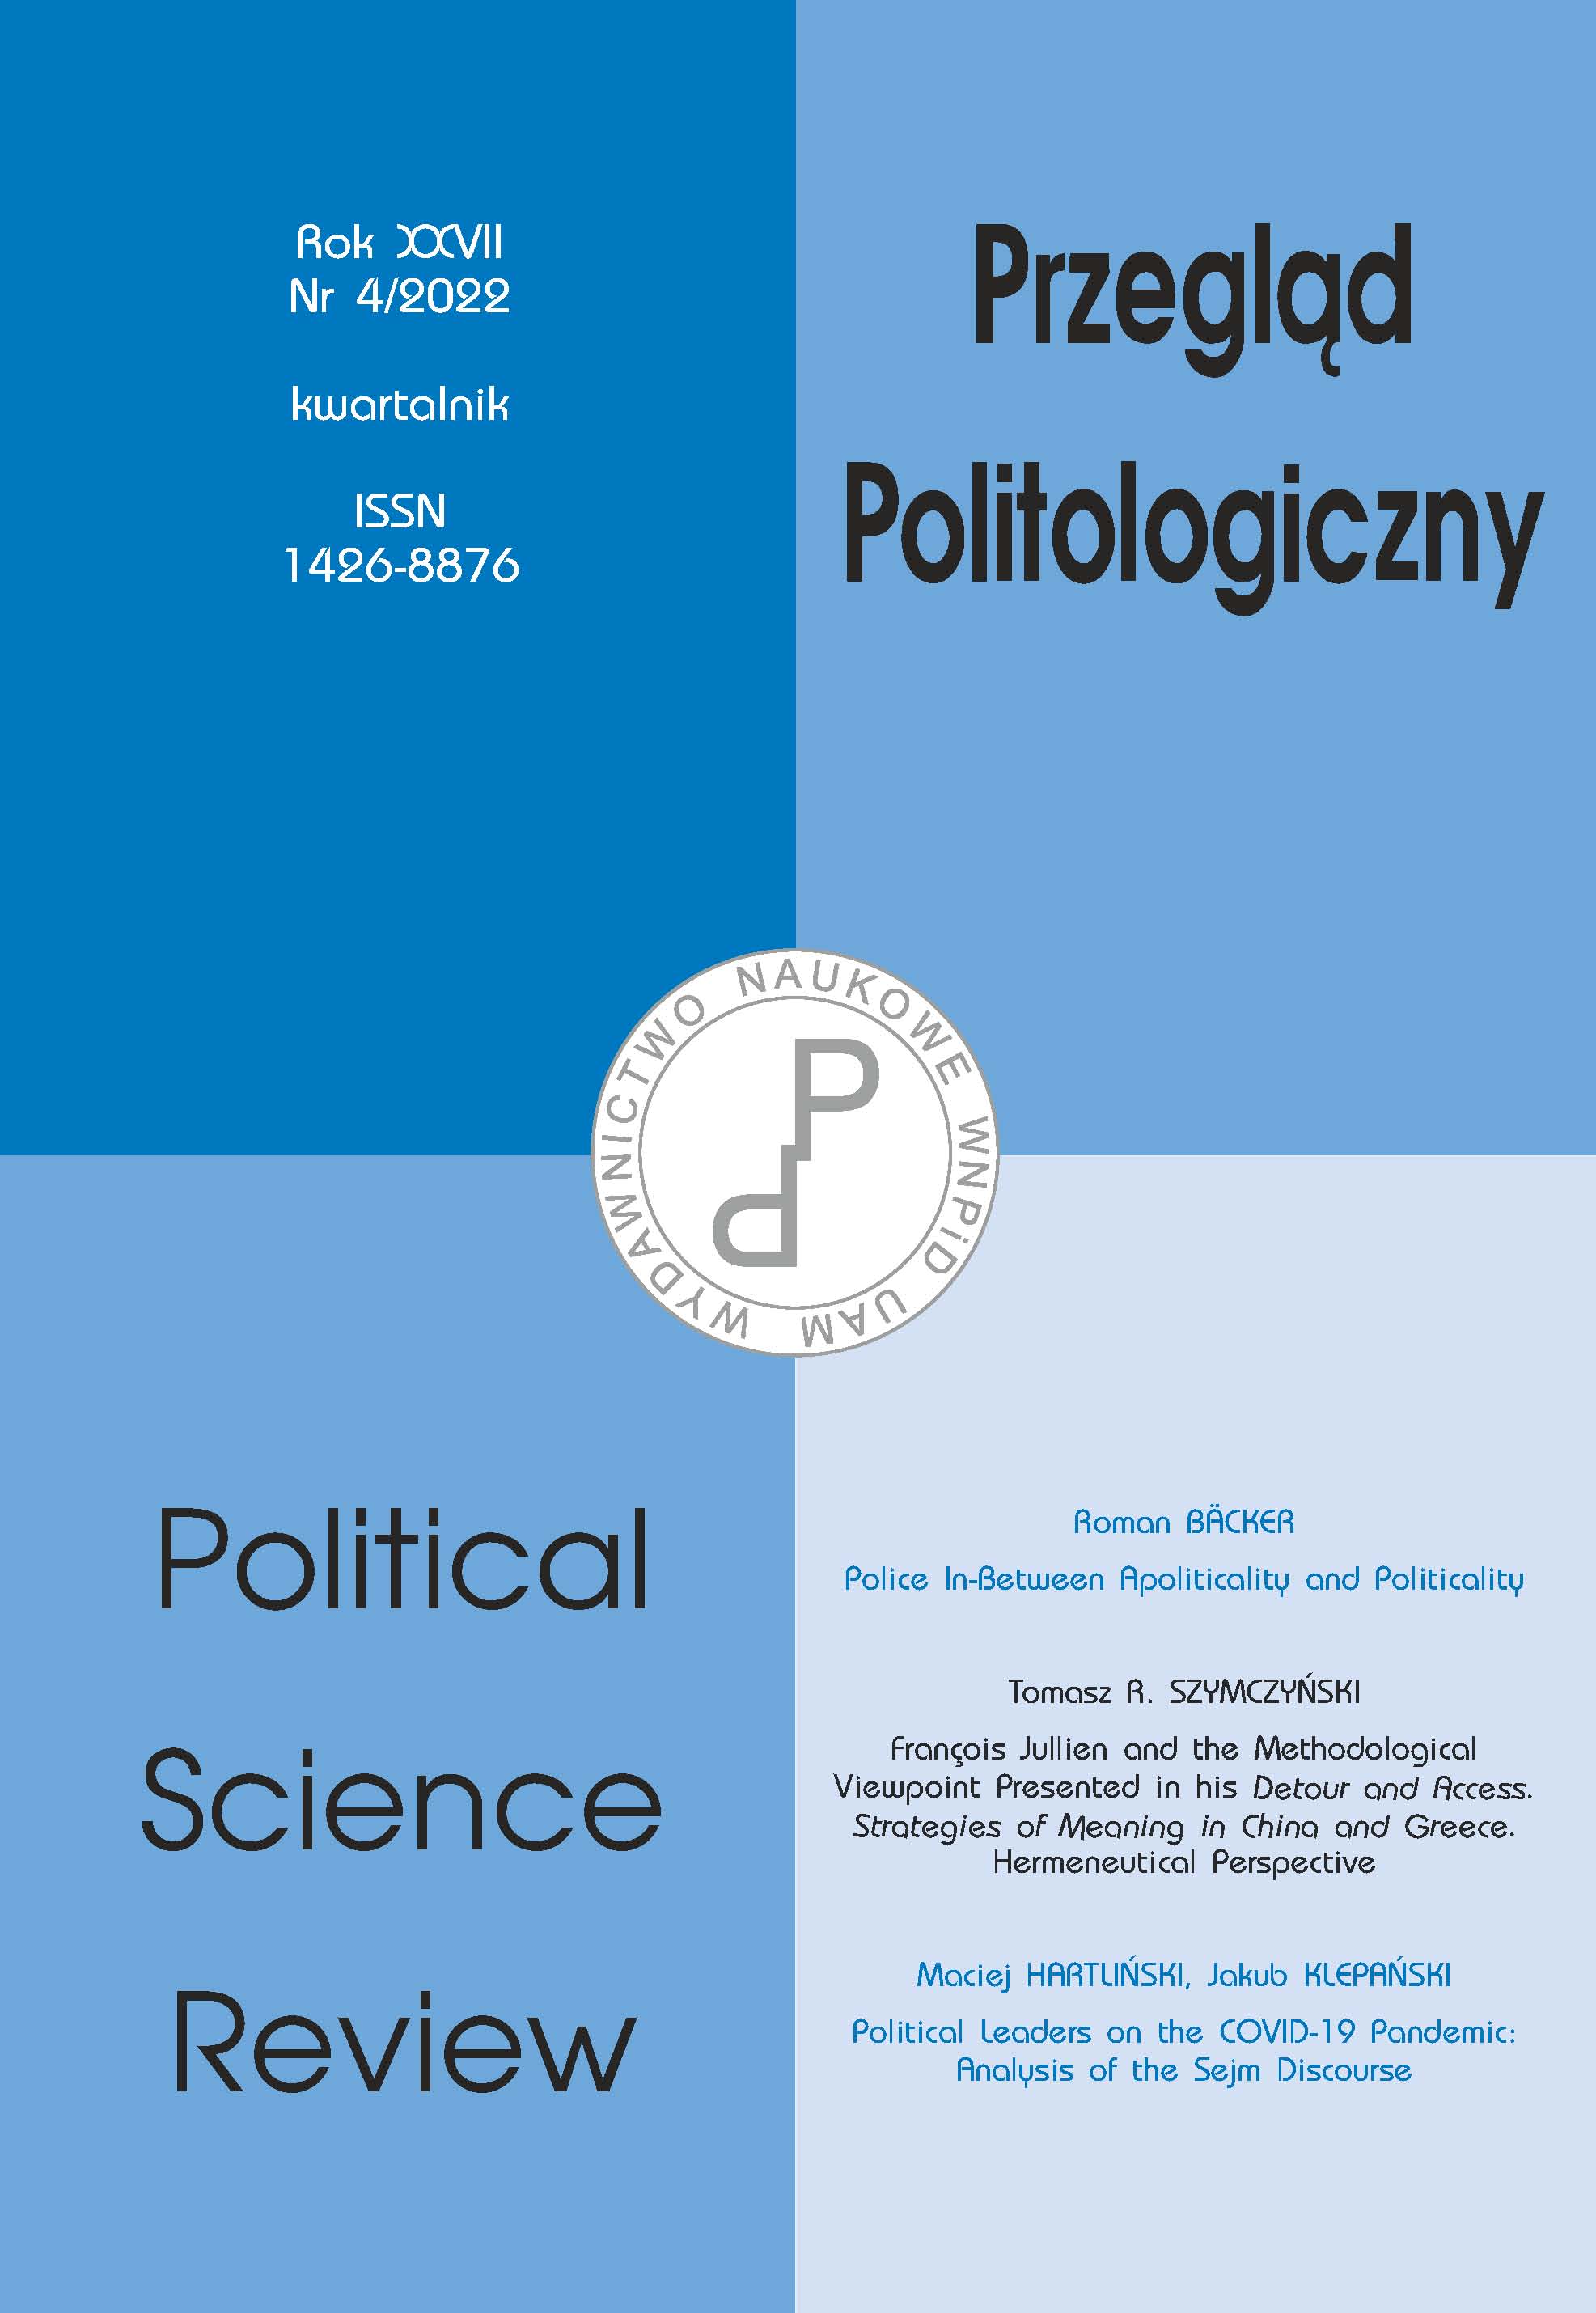 Police In-Between Apoliticality and Politicality